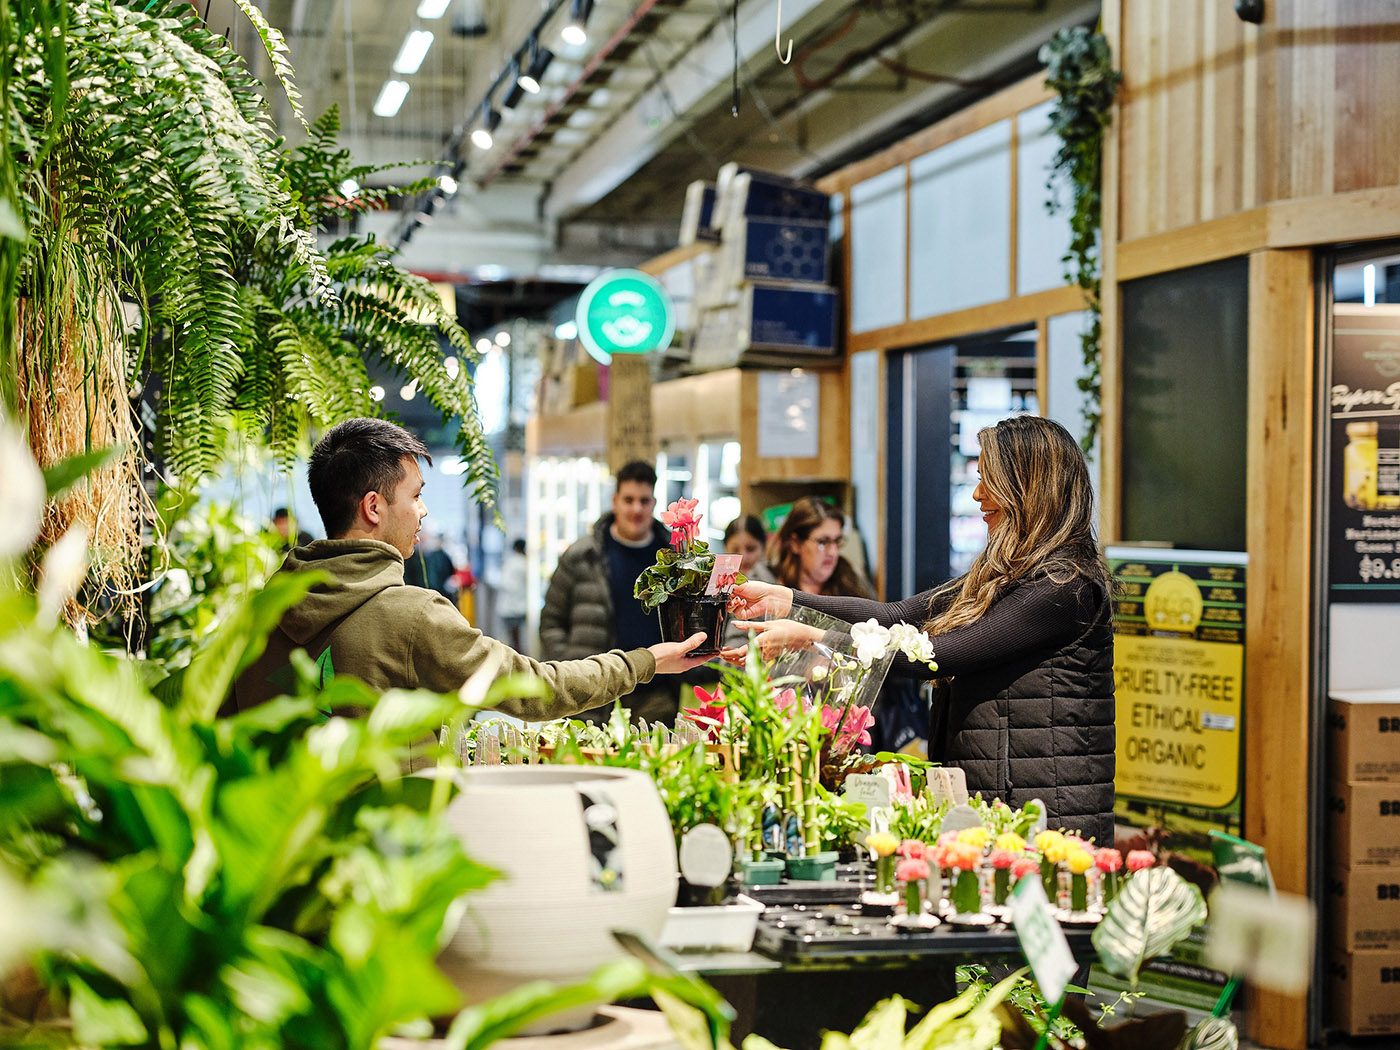 South Melbourne Market serves as a great introduction to Australia's culinary scene.